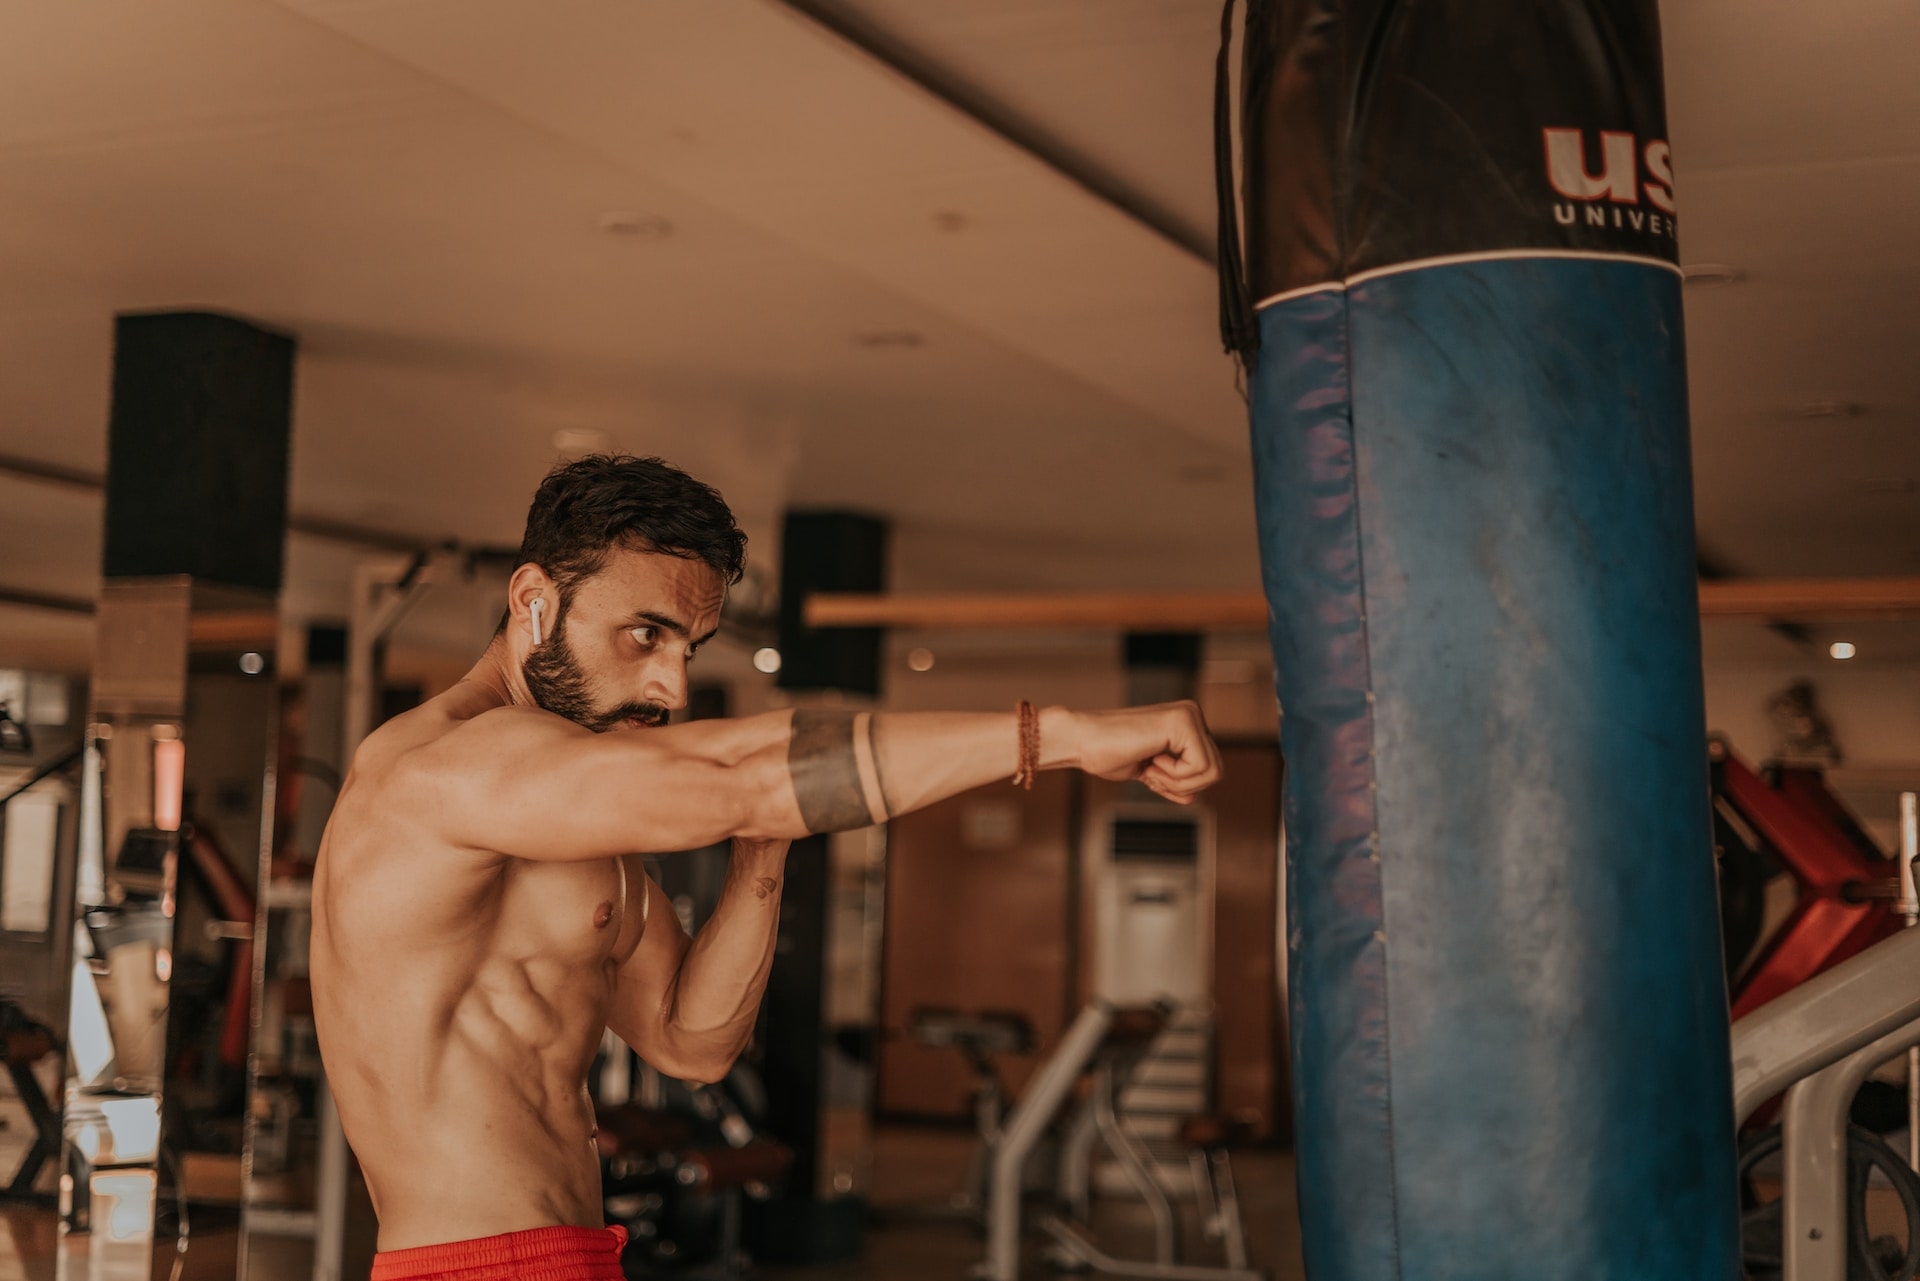 can you punch a heavy bag without gloves?